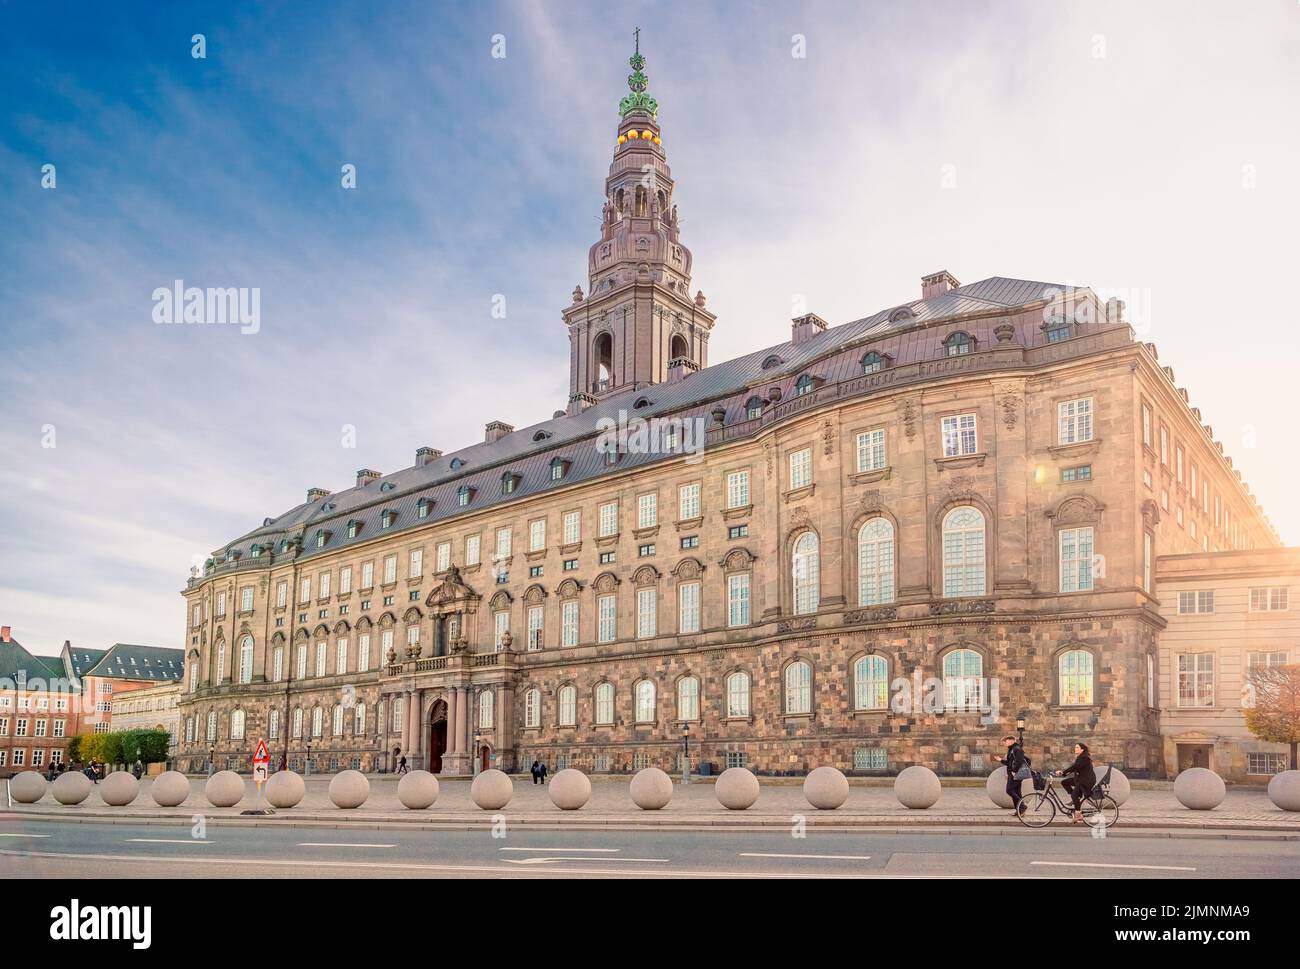 Christiansborg Palace with Christiansborg tower - the seat of the Danish Parliament in the rays of the setting sun. Copenhagen, Stock Photo